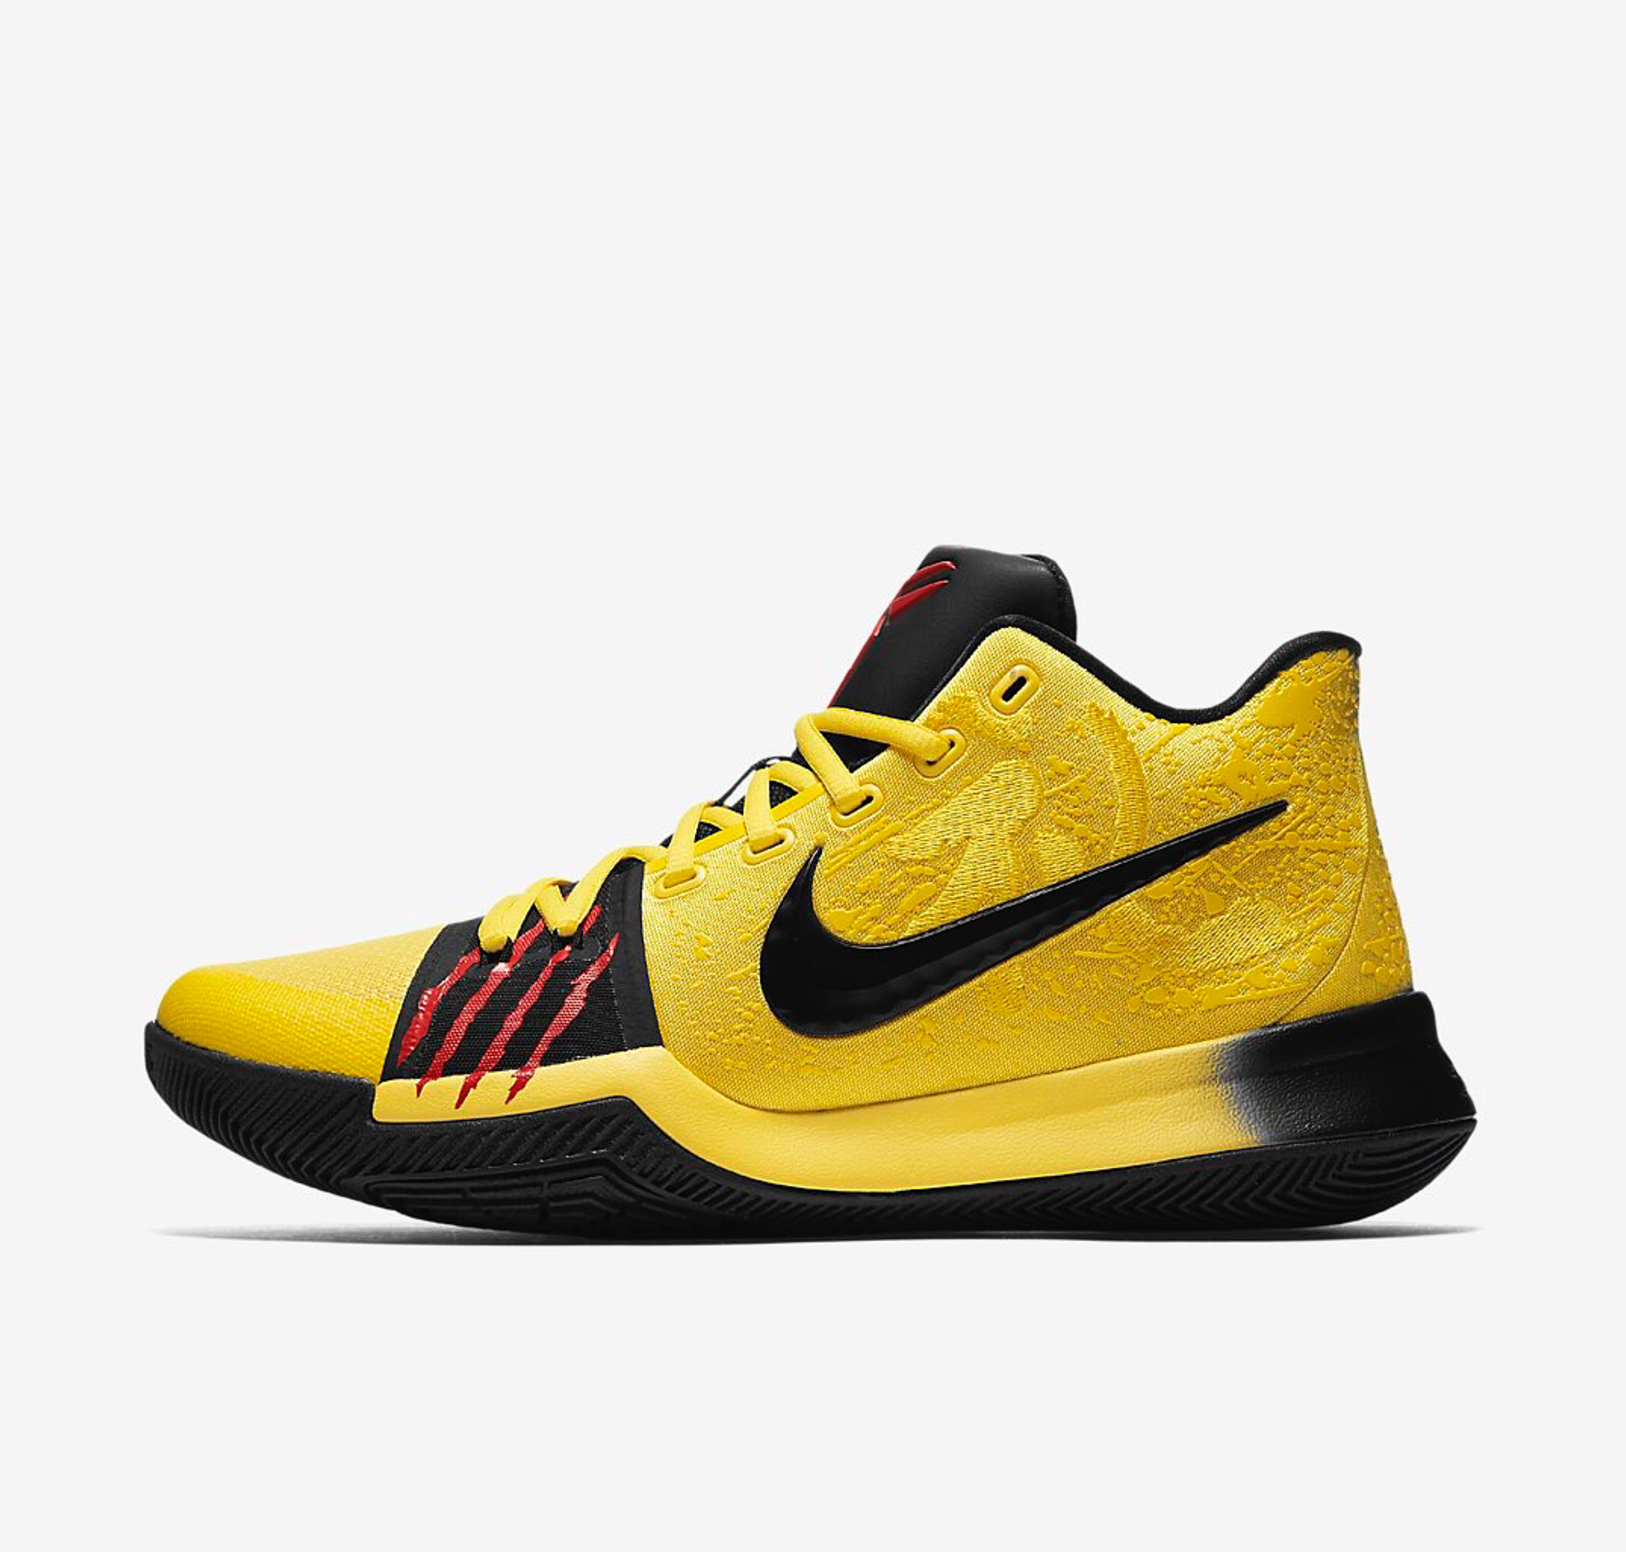 kyrie 3 mm